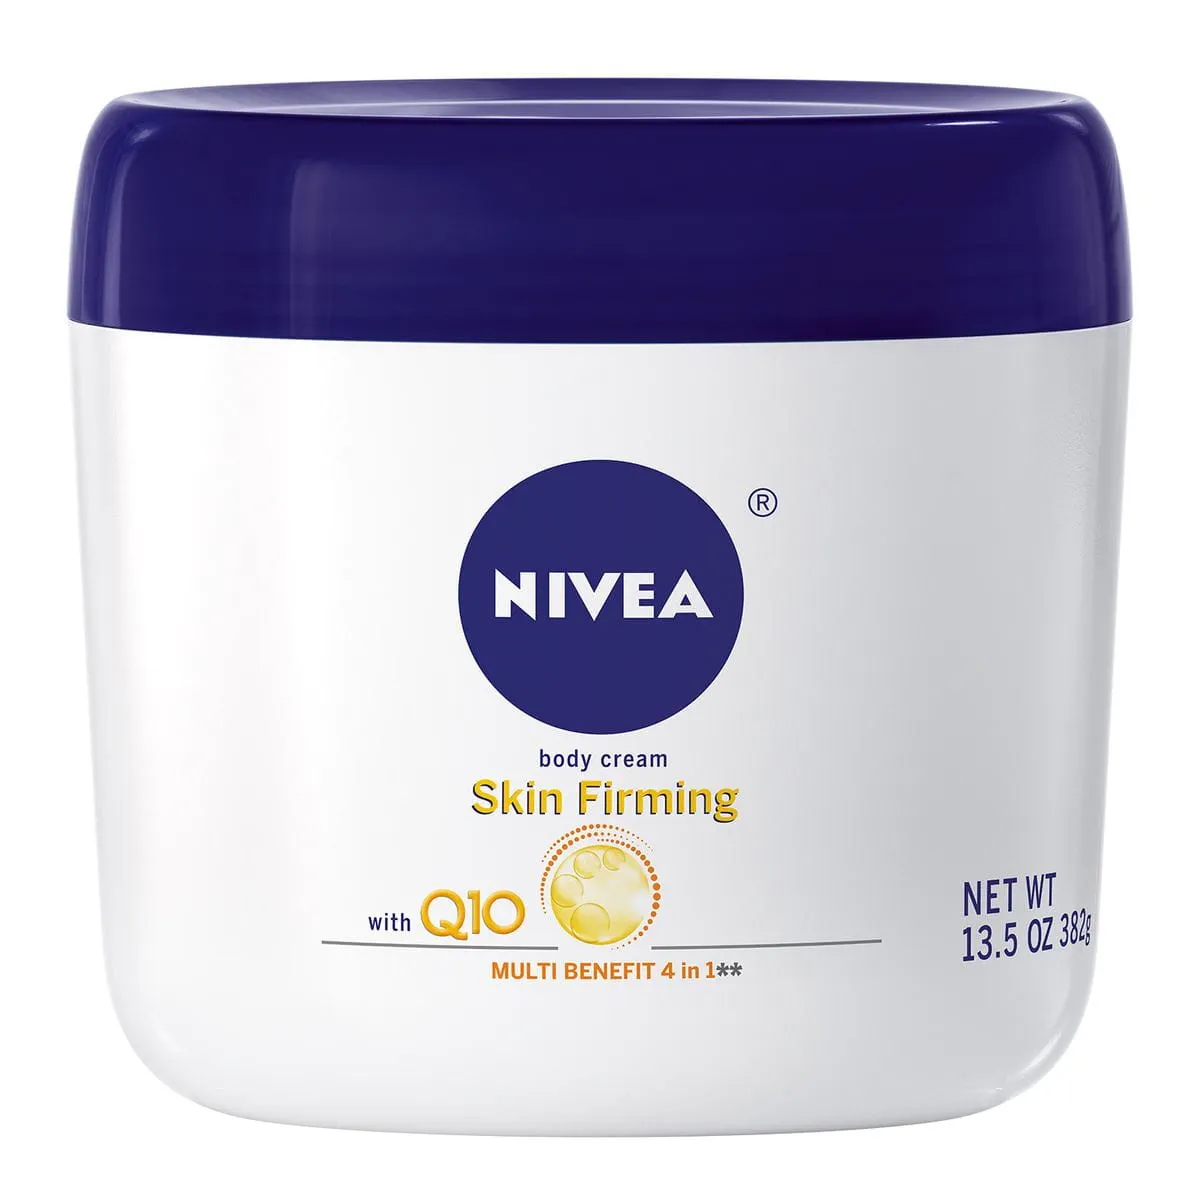  NIVEA Skin Firming Sheer Hydration Body Lotion with Q10 and  Creatine, Skin Firming Lotion, Moisturizing Shea Butter Lotion, Multipack,  3-16.9 Fl Oz Pump Bottles : Everything Else